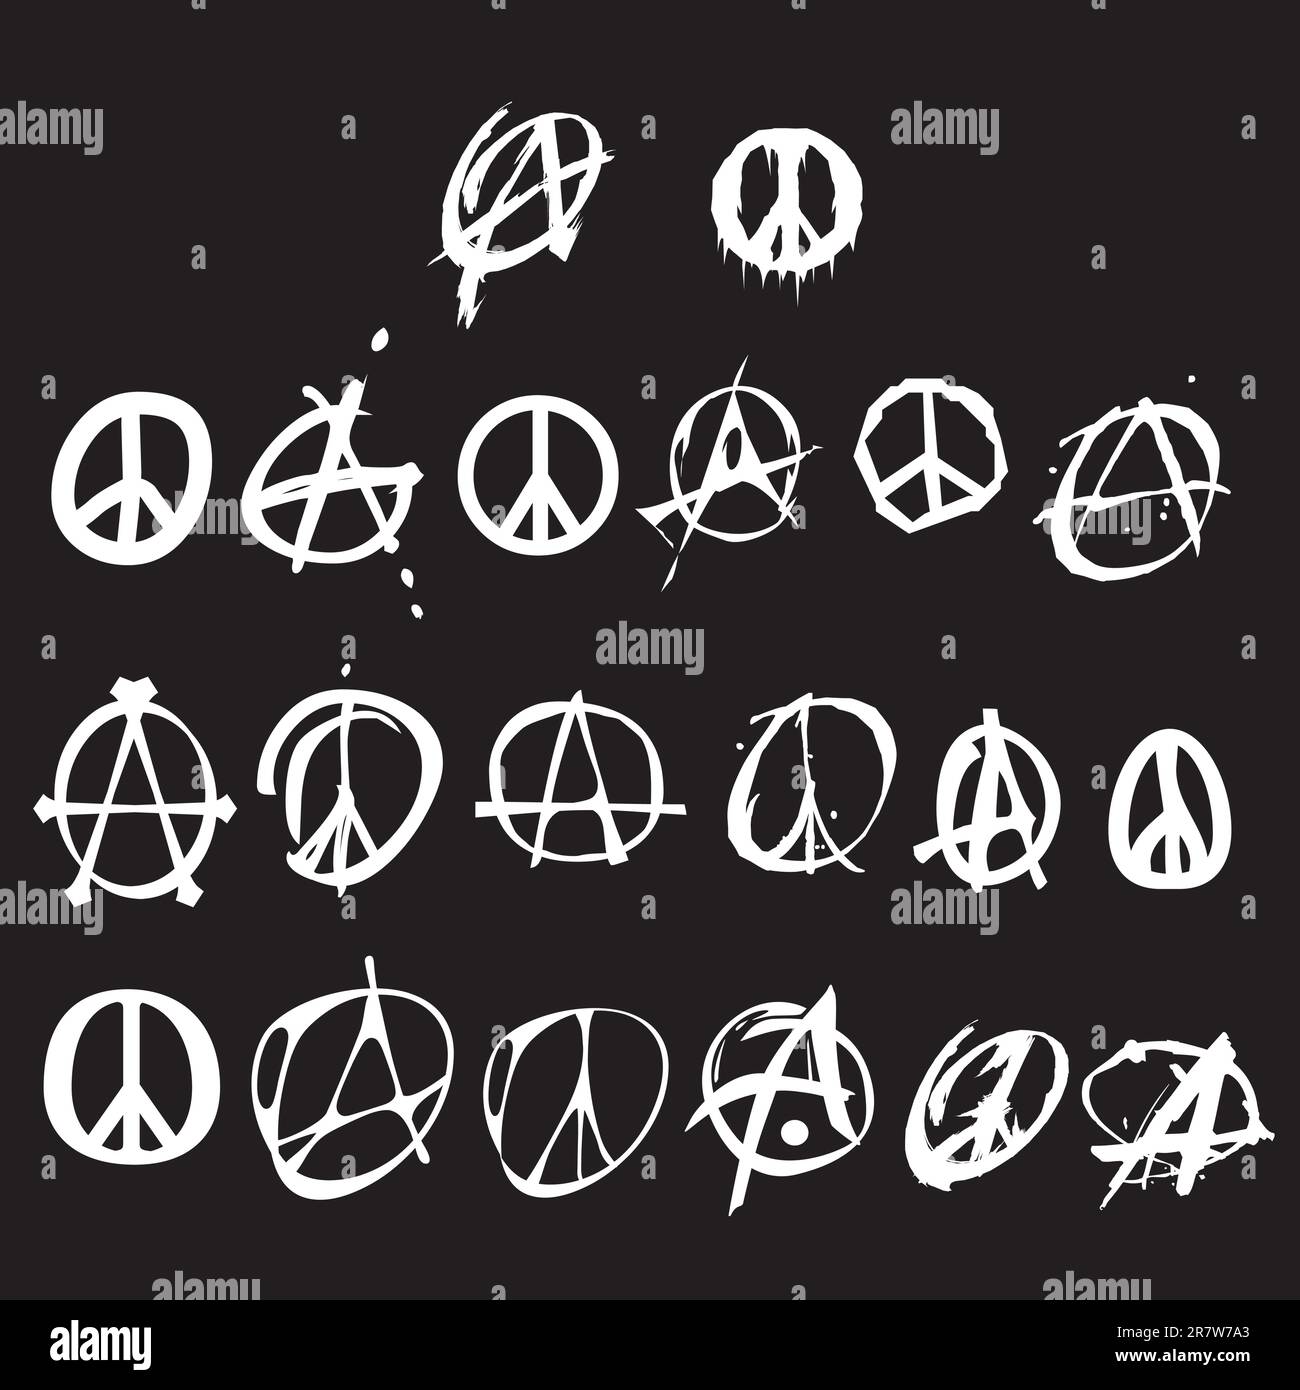 Premium Vector | Colorful peace and fire symbol doodle illustration for  sticker tattoo poster tshirt design etc